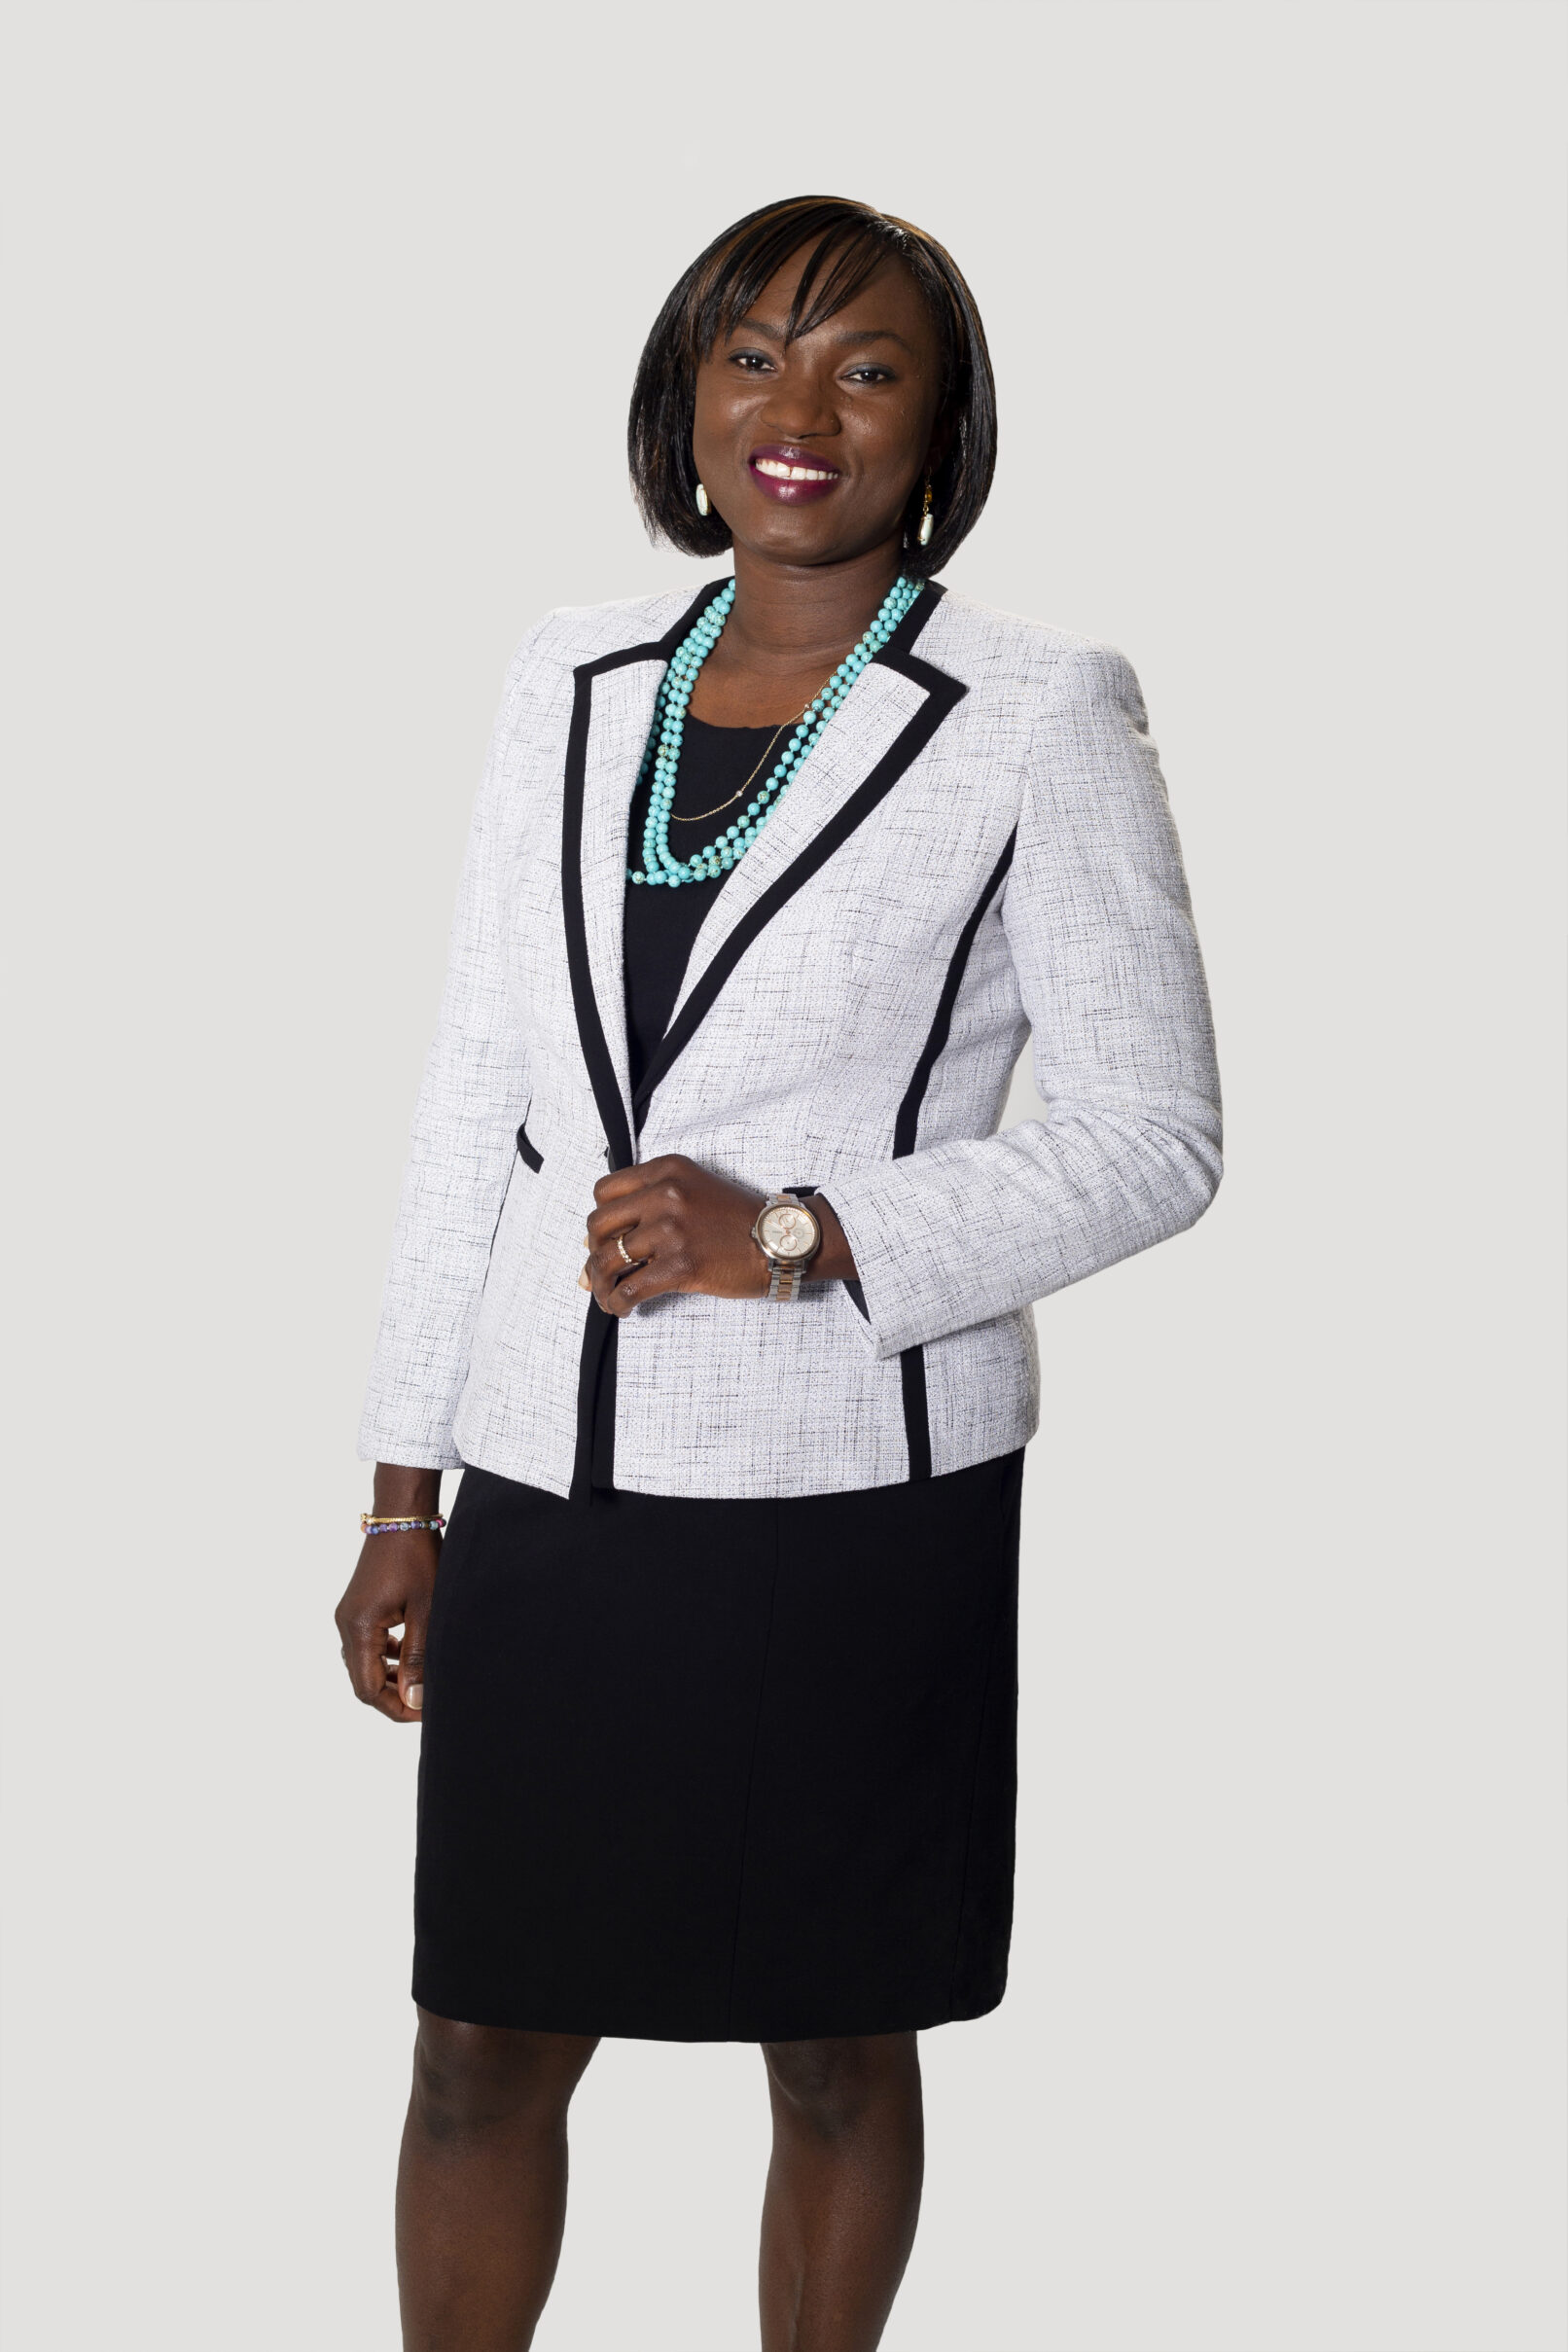 Portrait of a Black woman in a suit taken on a white background.